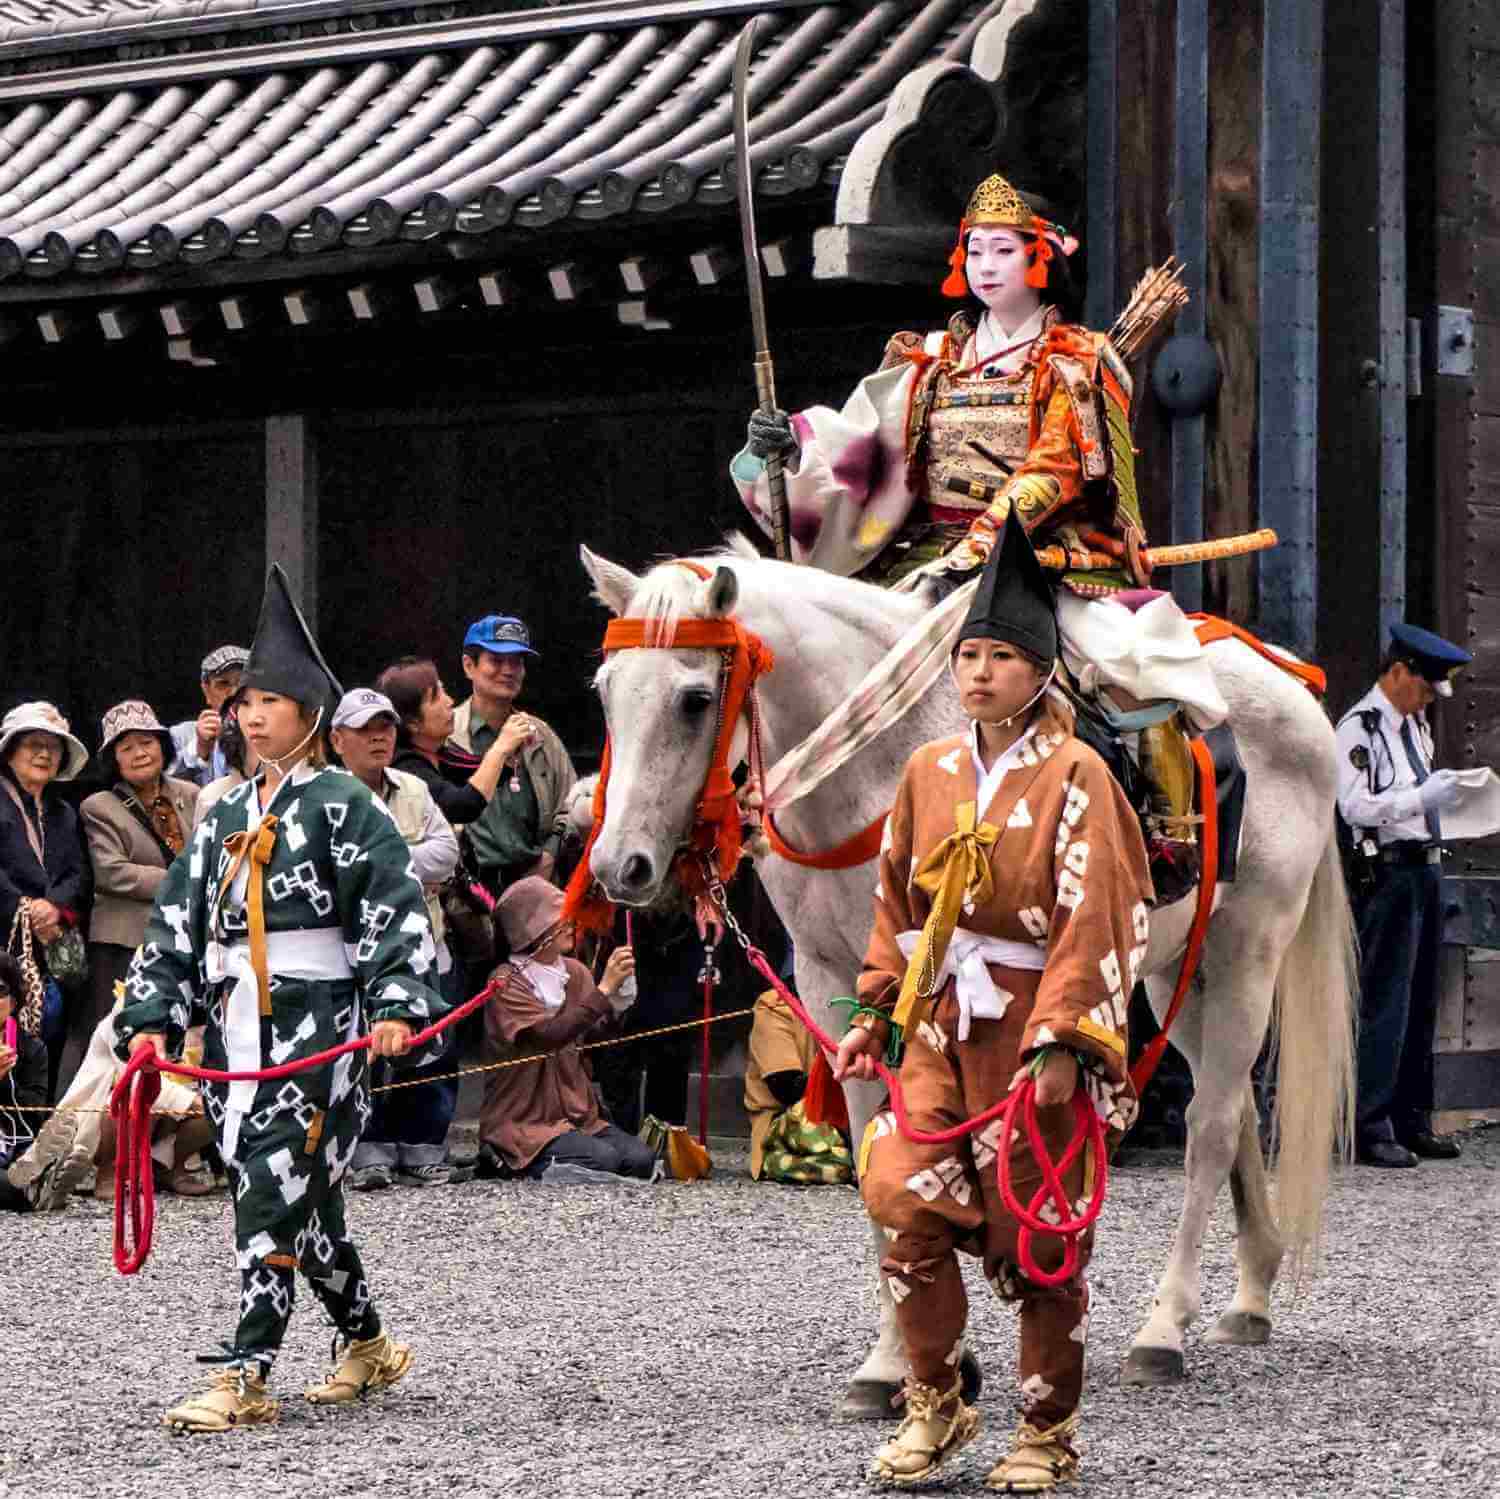 The Jidai Matsuri Festival is a traditional Japanese festival held annually on October 22 in Kyoto, Japan = Shutterstock 6